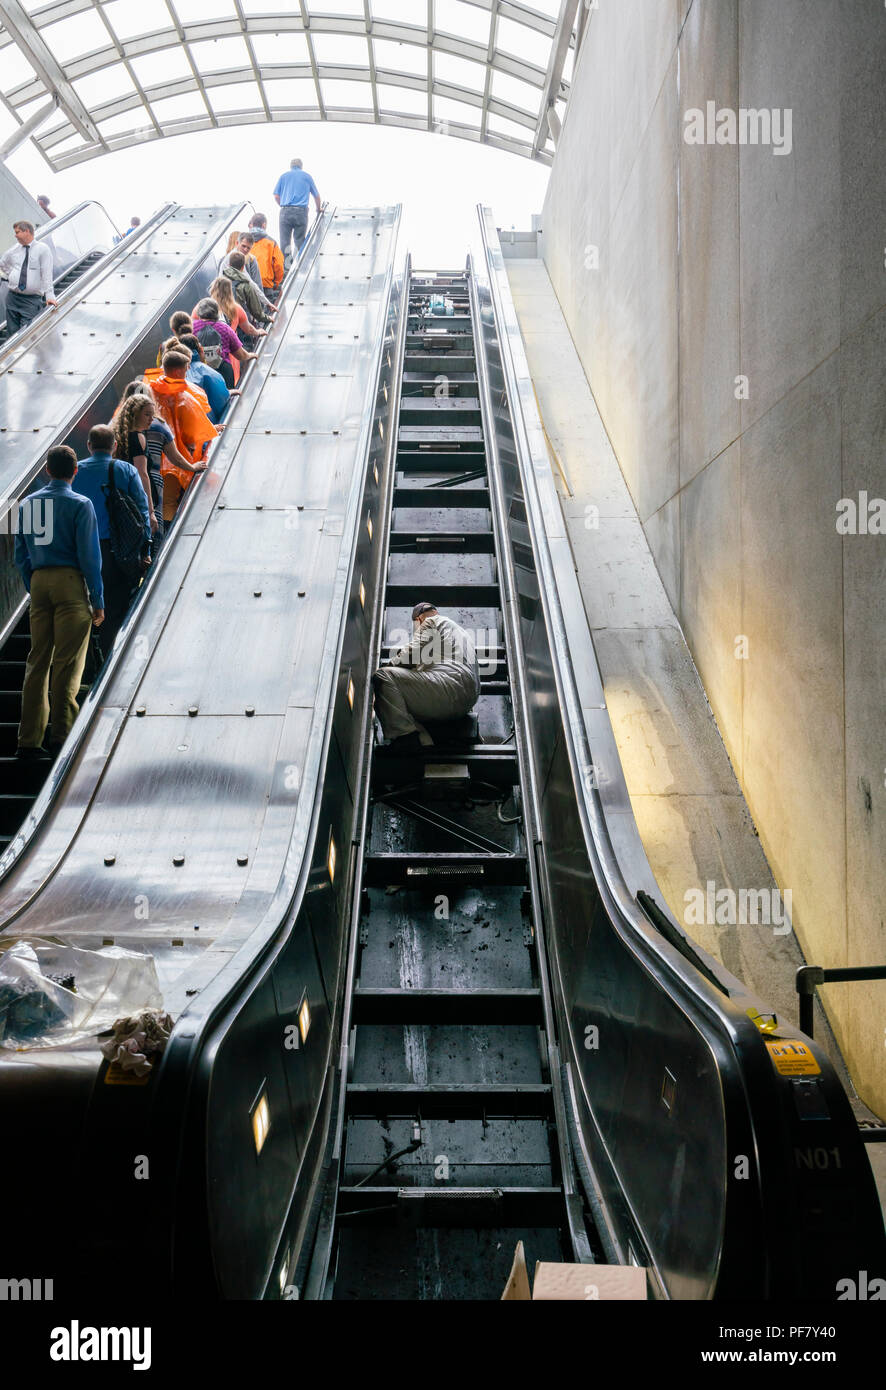 Worker repairing an escalator in a train station Stock Photo